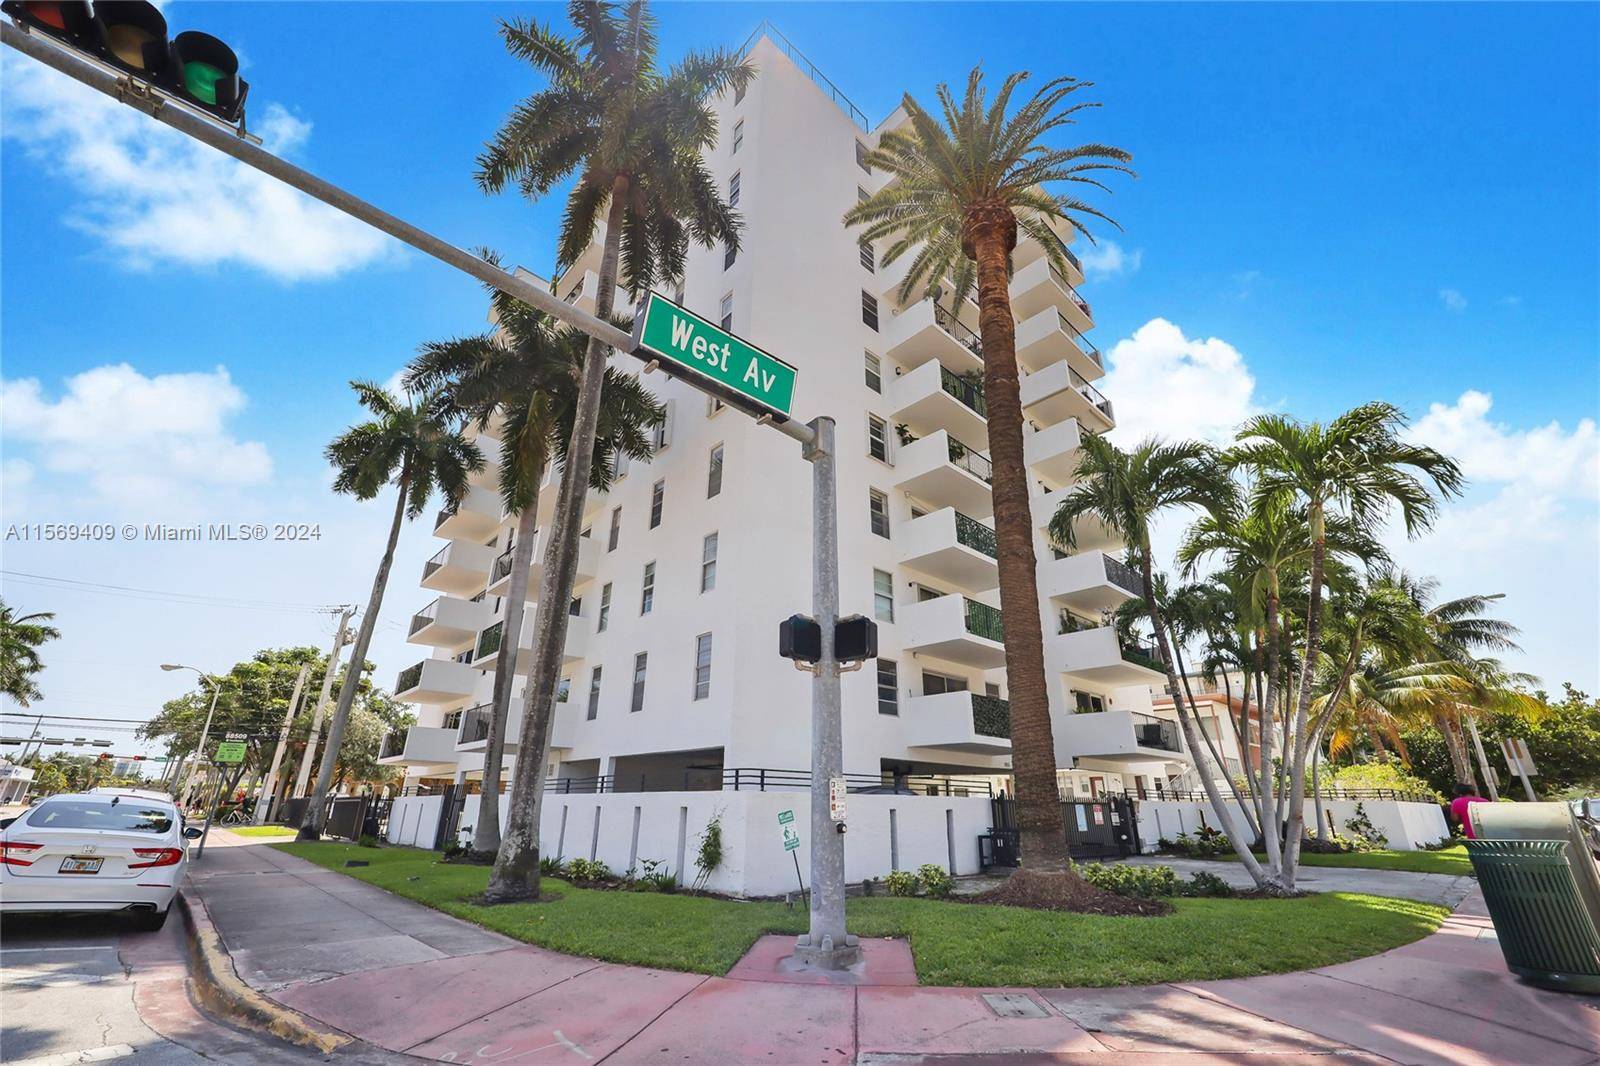 Live in the heart of South Beach, West Avenue neighborhood, boutique, and quiet building Bayshore Terrace Unit 502 offering very comfortable one bedroom 1.